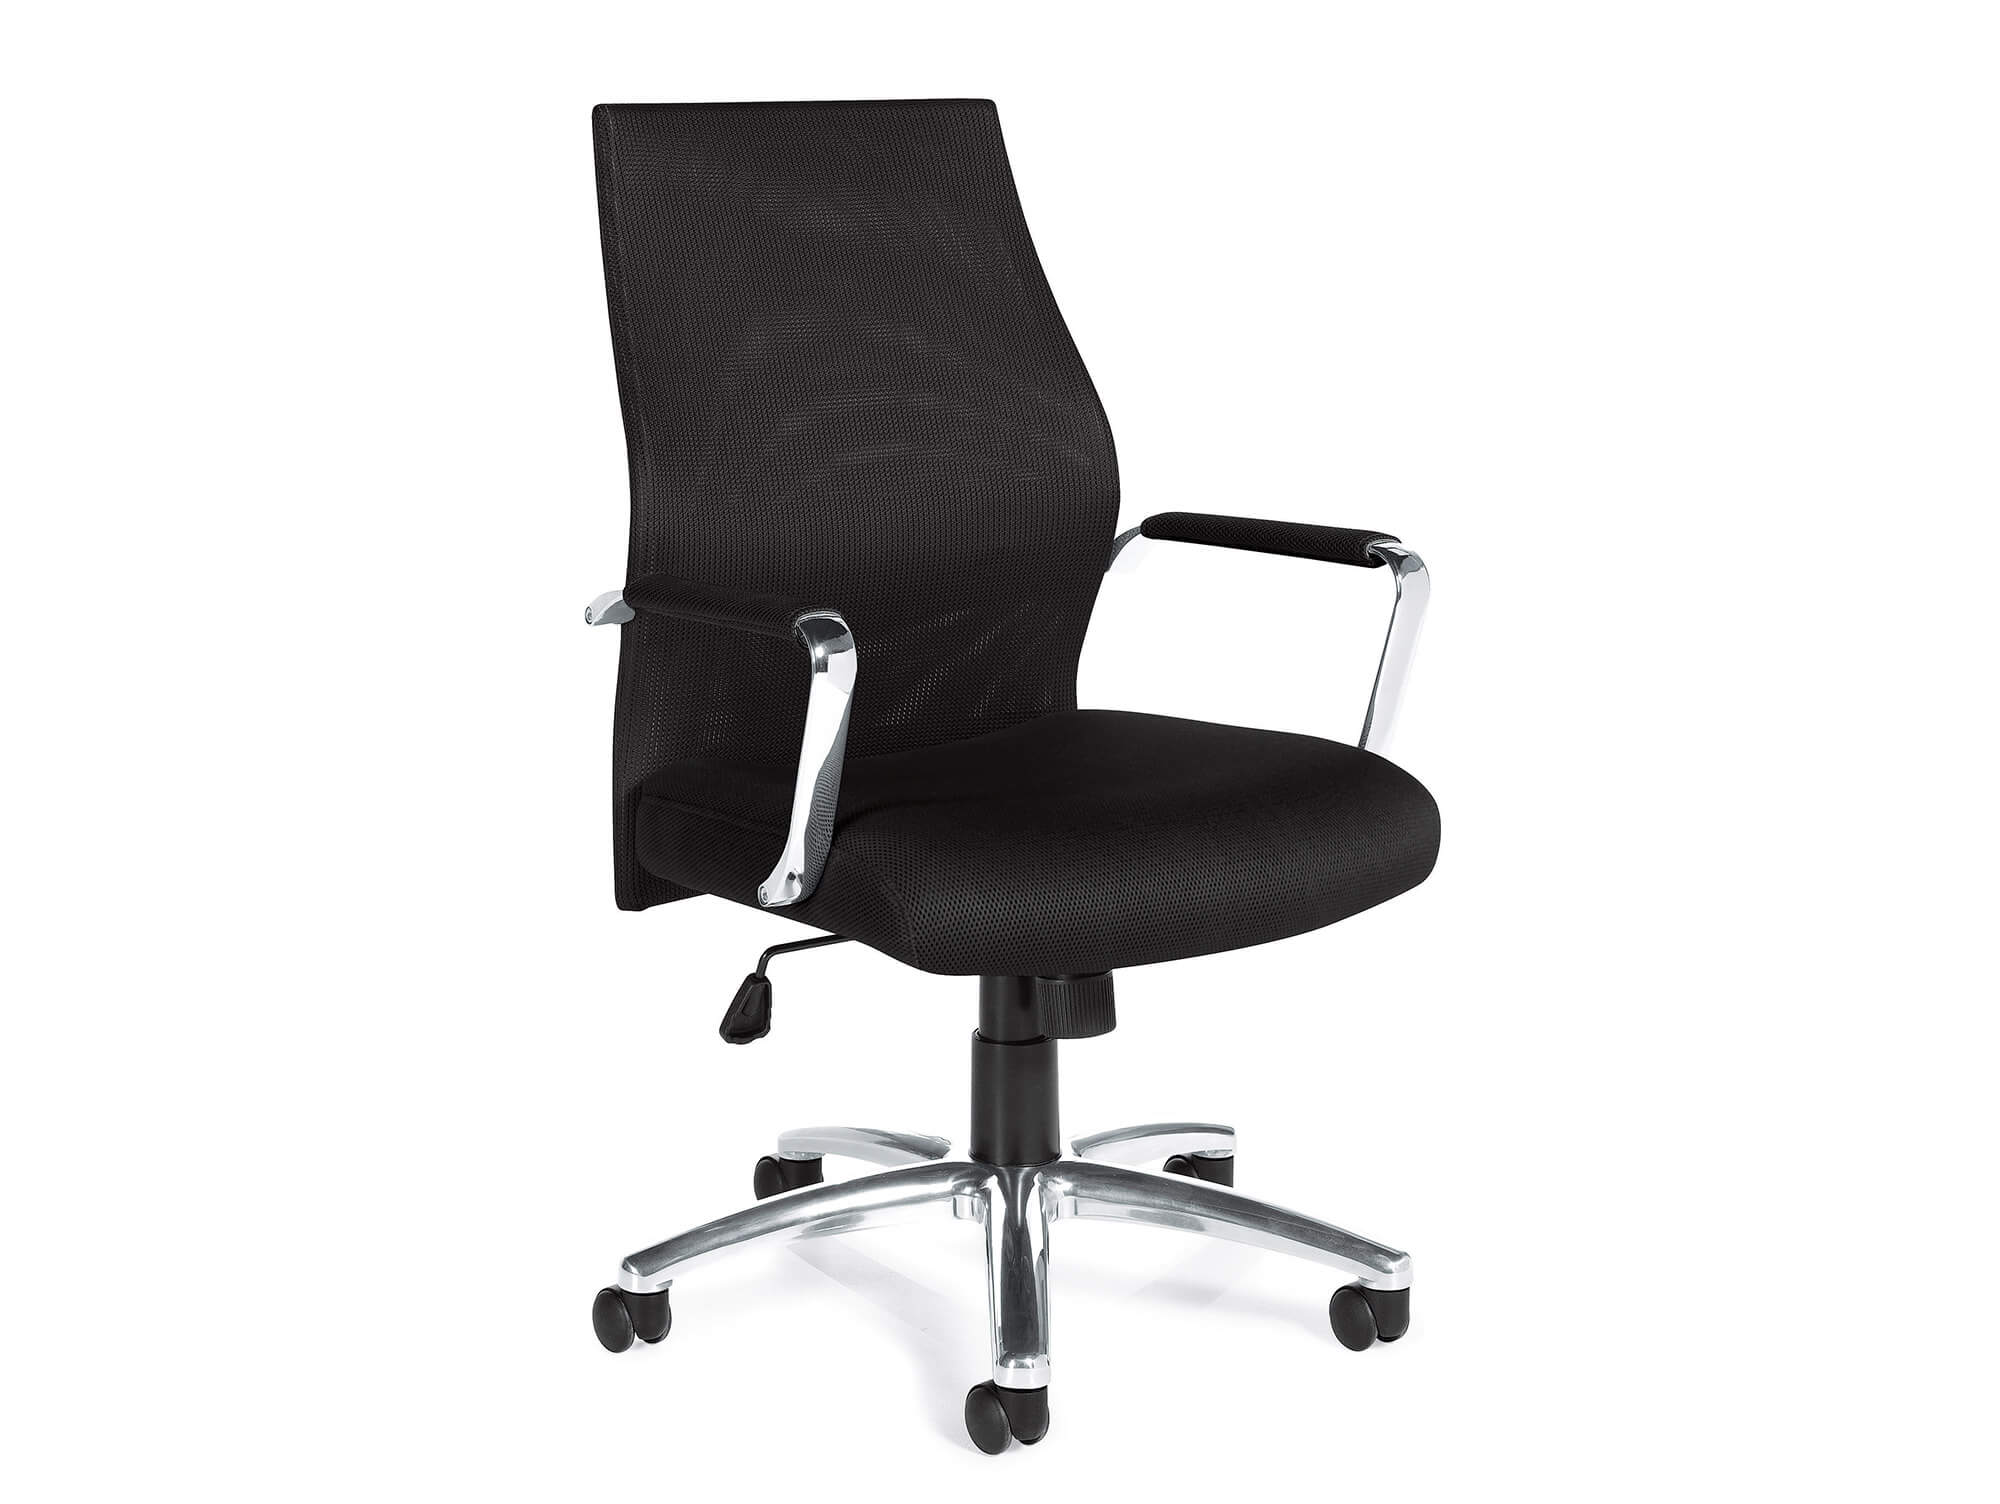 chairs-for-office-modern-office-chair.jpg